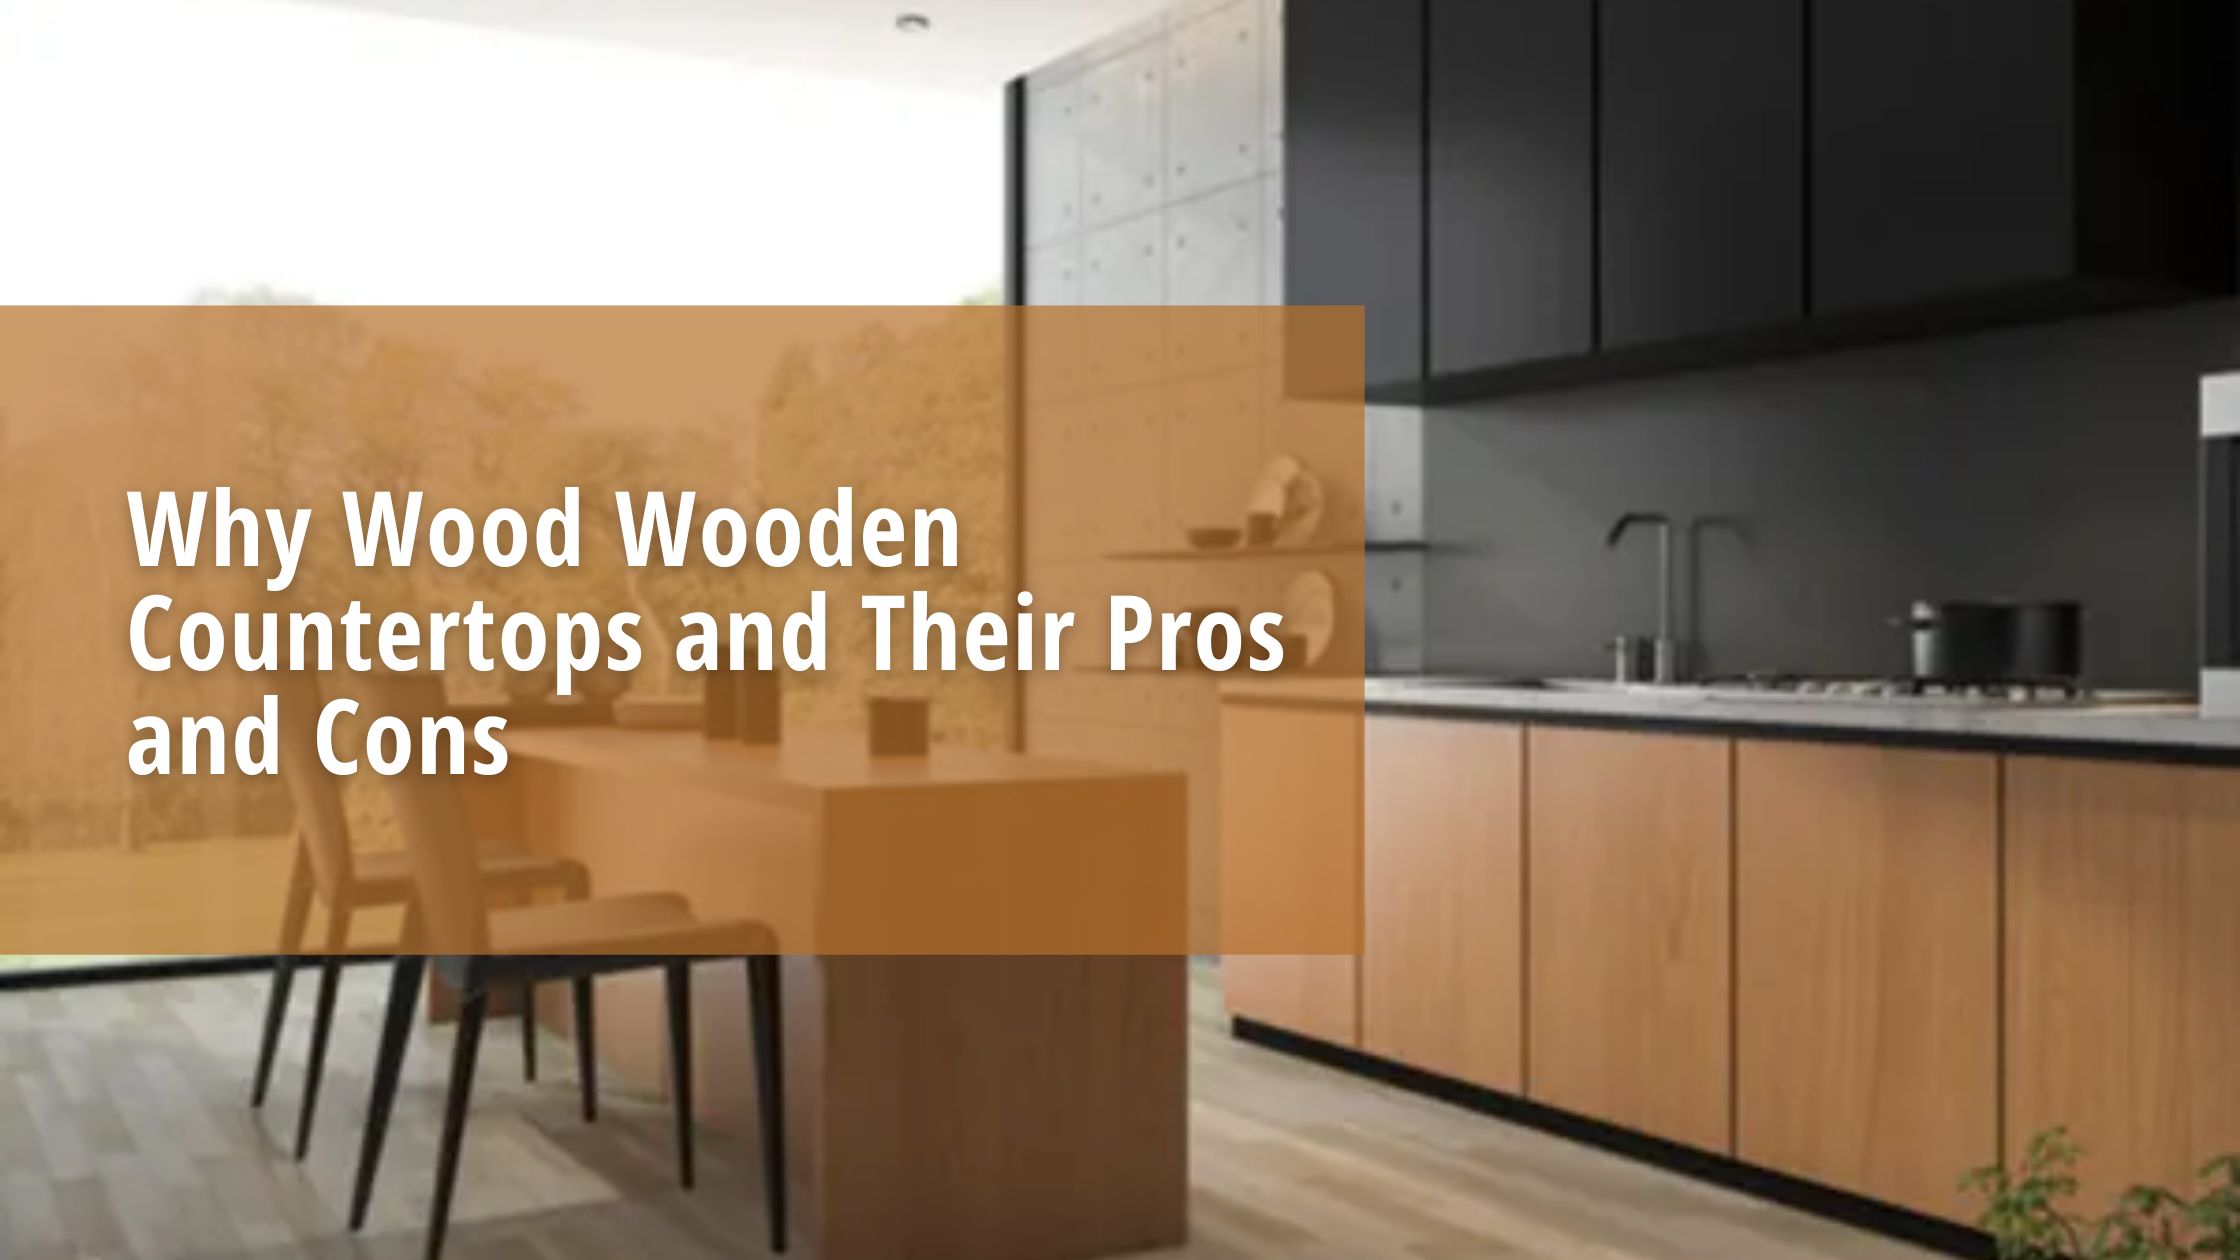 Why Wood Wooden Countertops and Their Pros and Cons